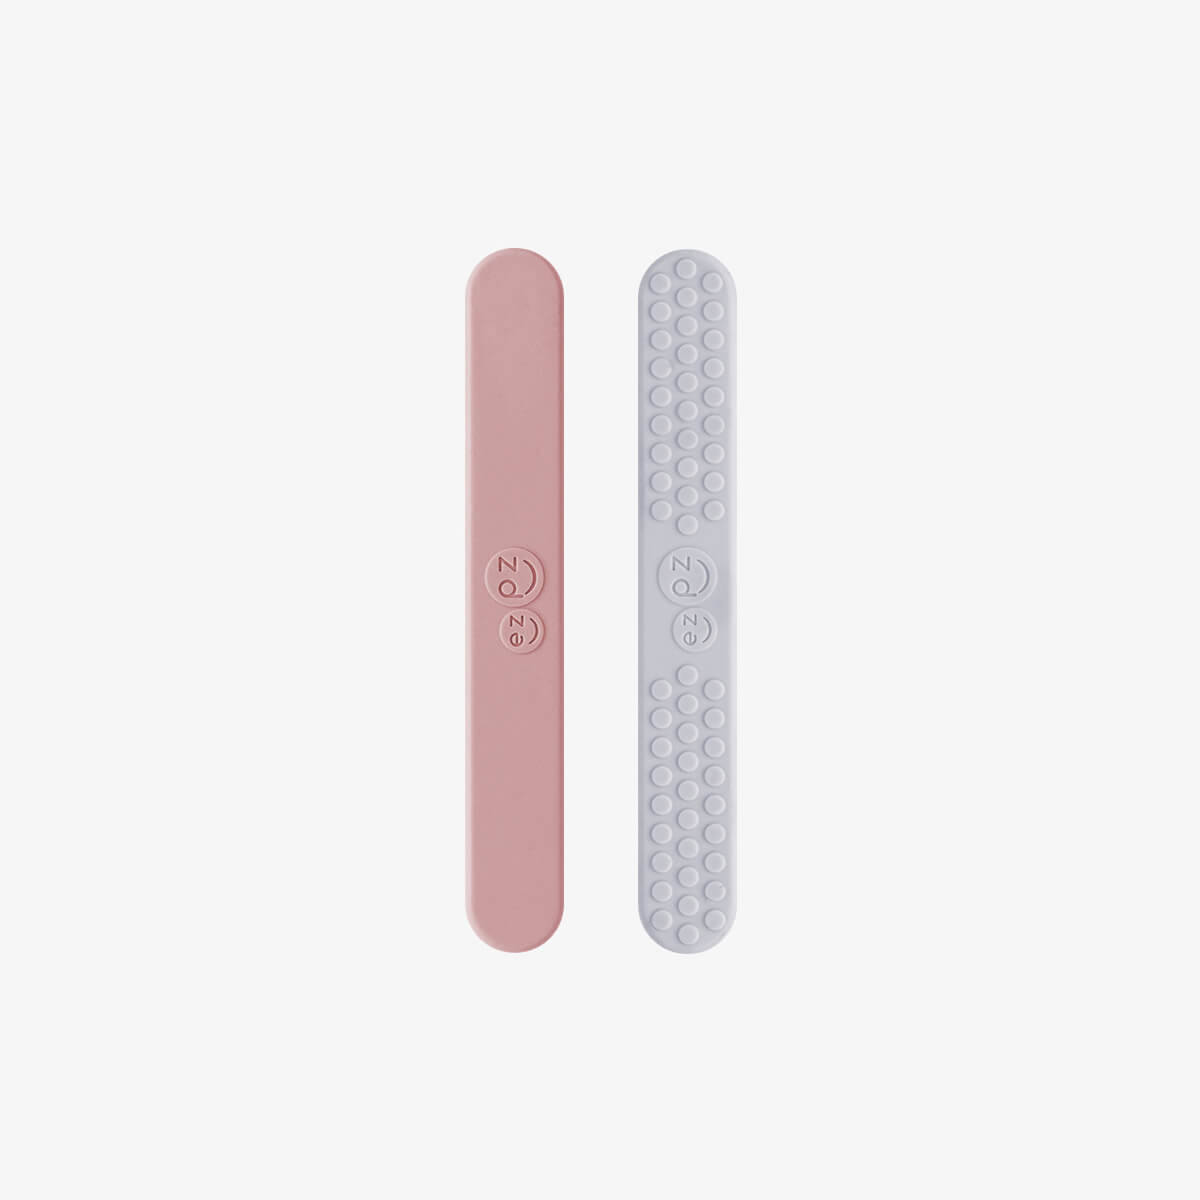 ezpz sensory tongue depressor in blush pink and pewter gray / silicone tongue depressor for babies